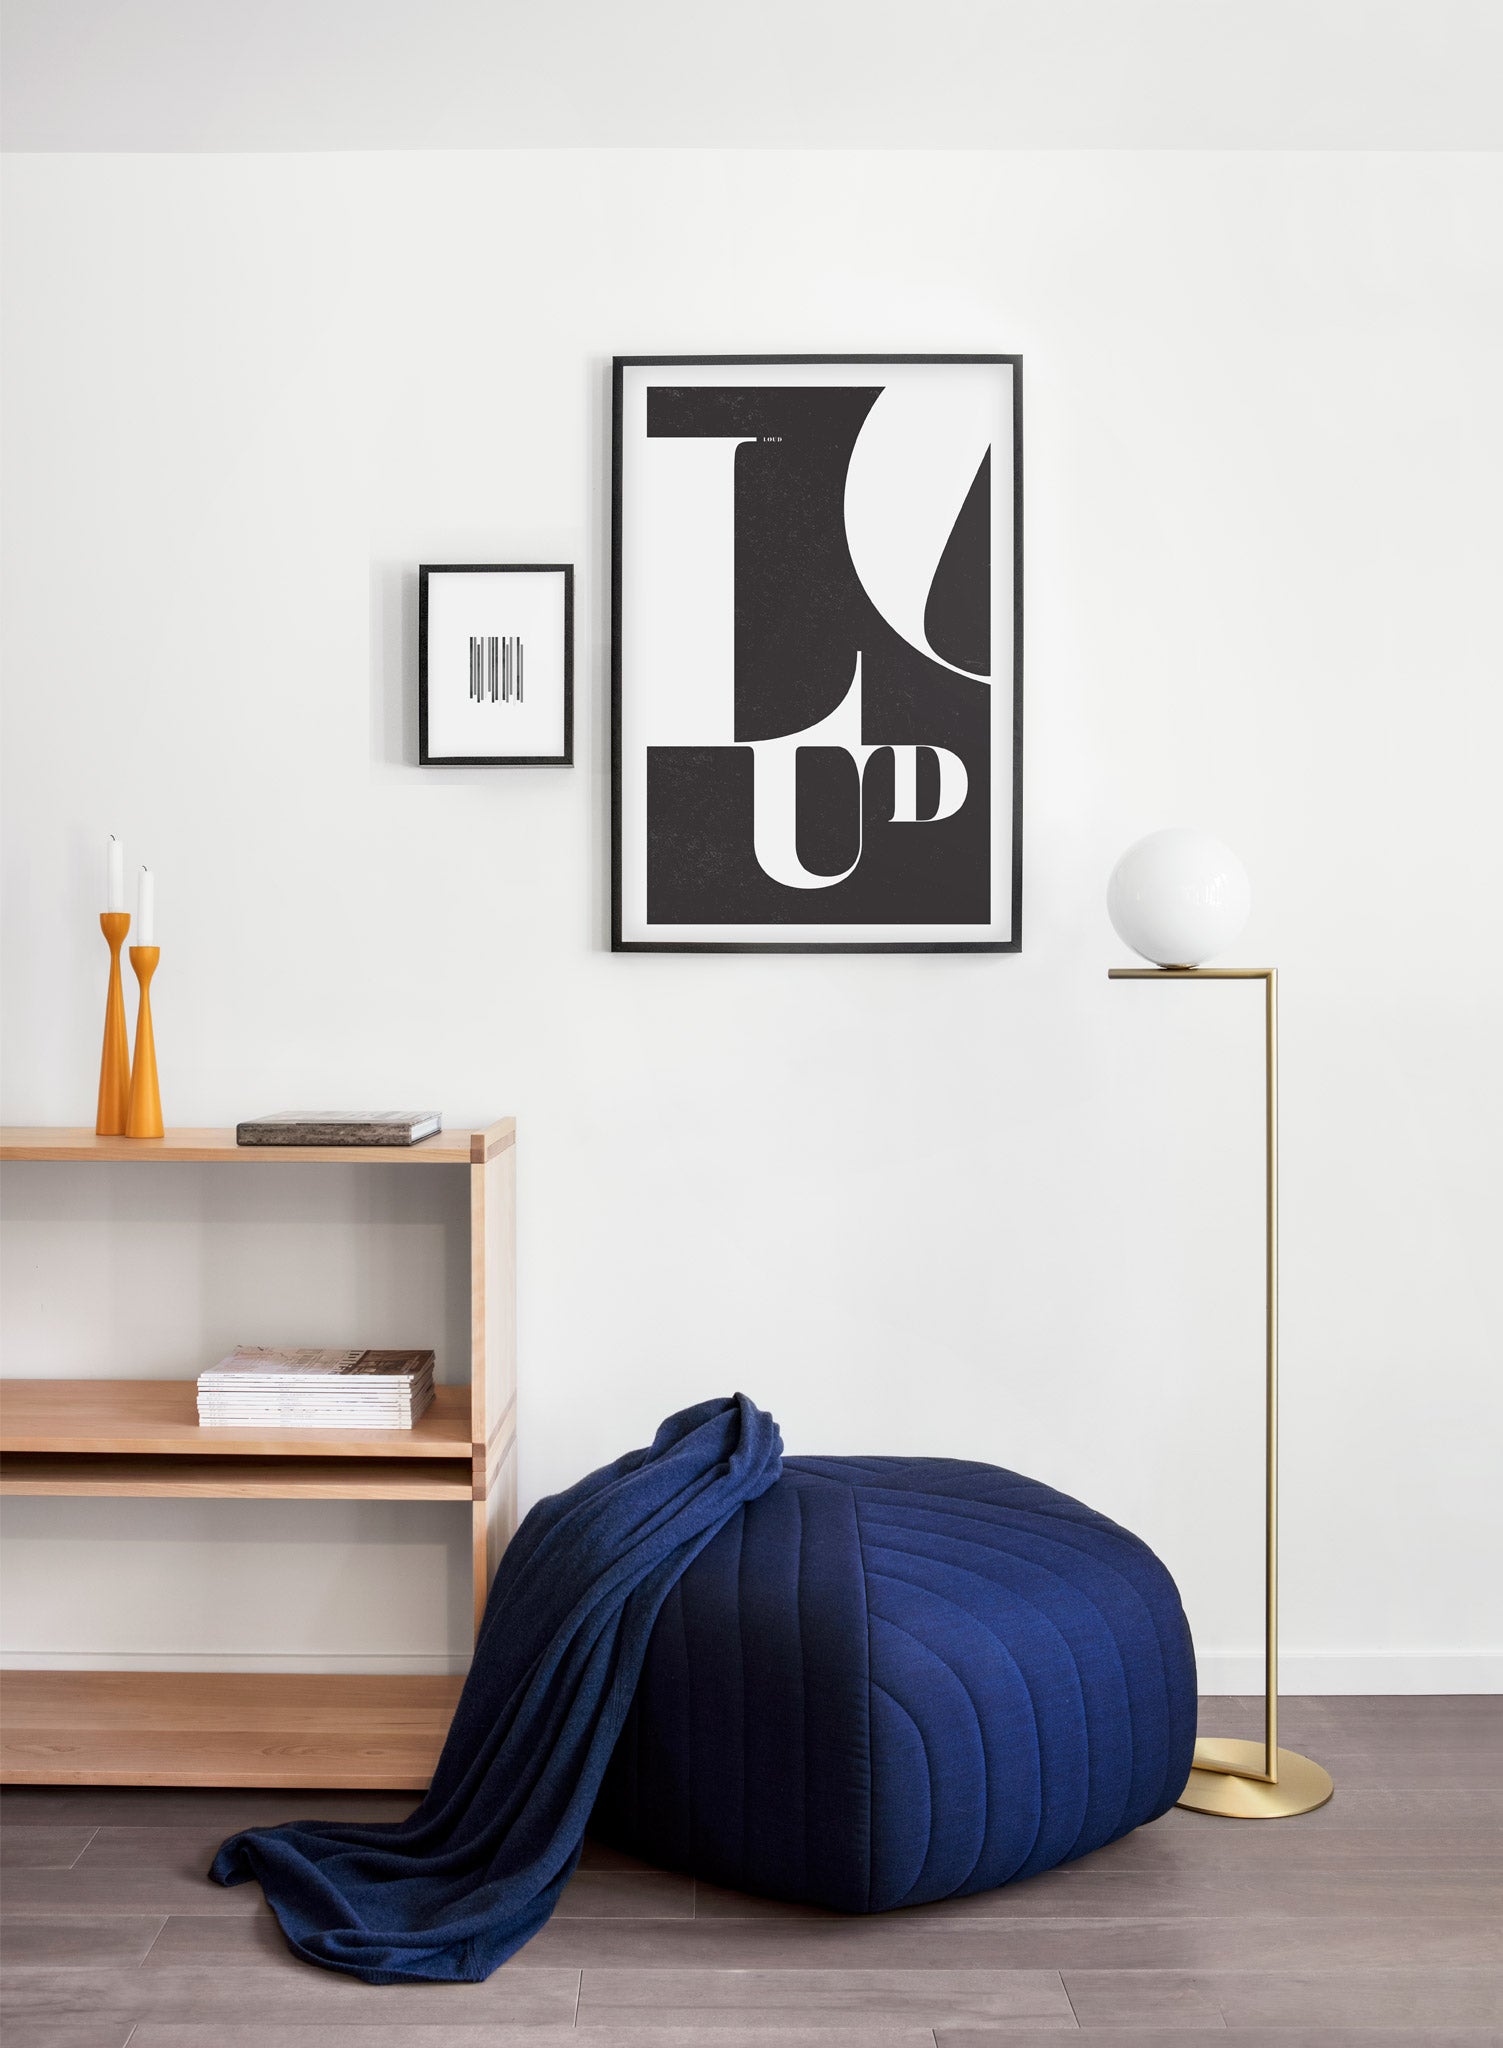 Scandinavian poster by Opposite Wall with trendy black and white typo design featuring the word LOUD - Living room with a pouf